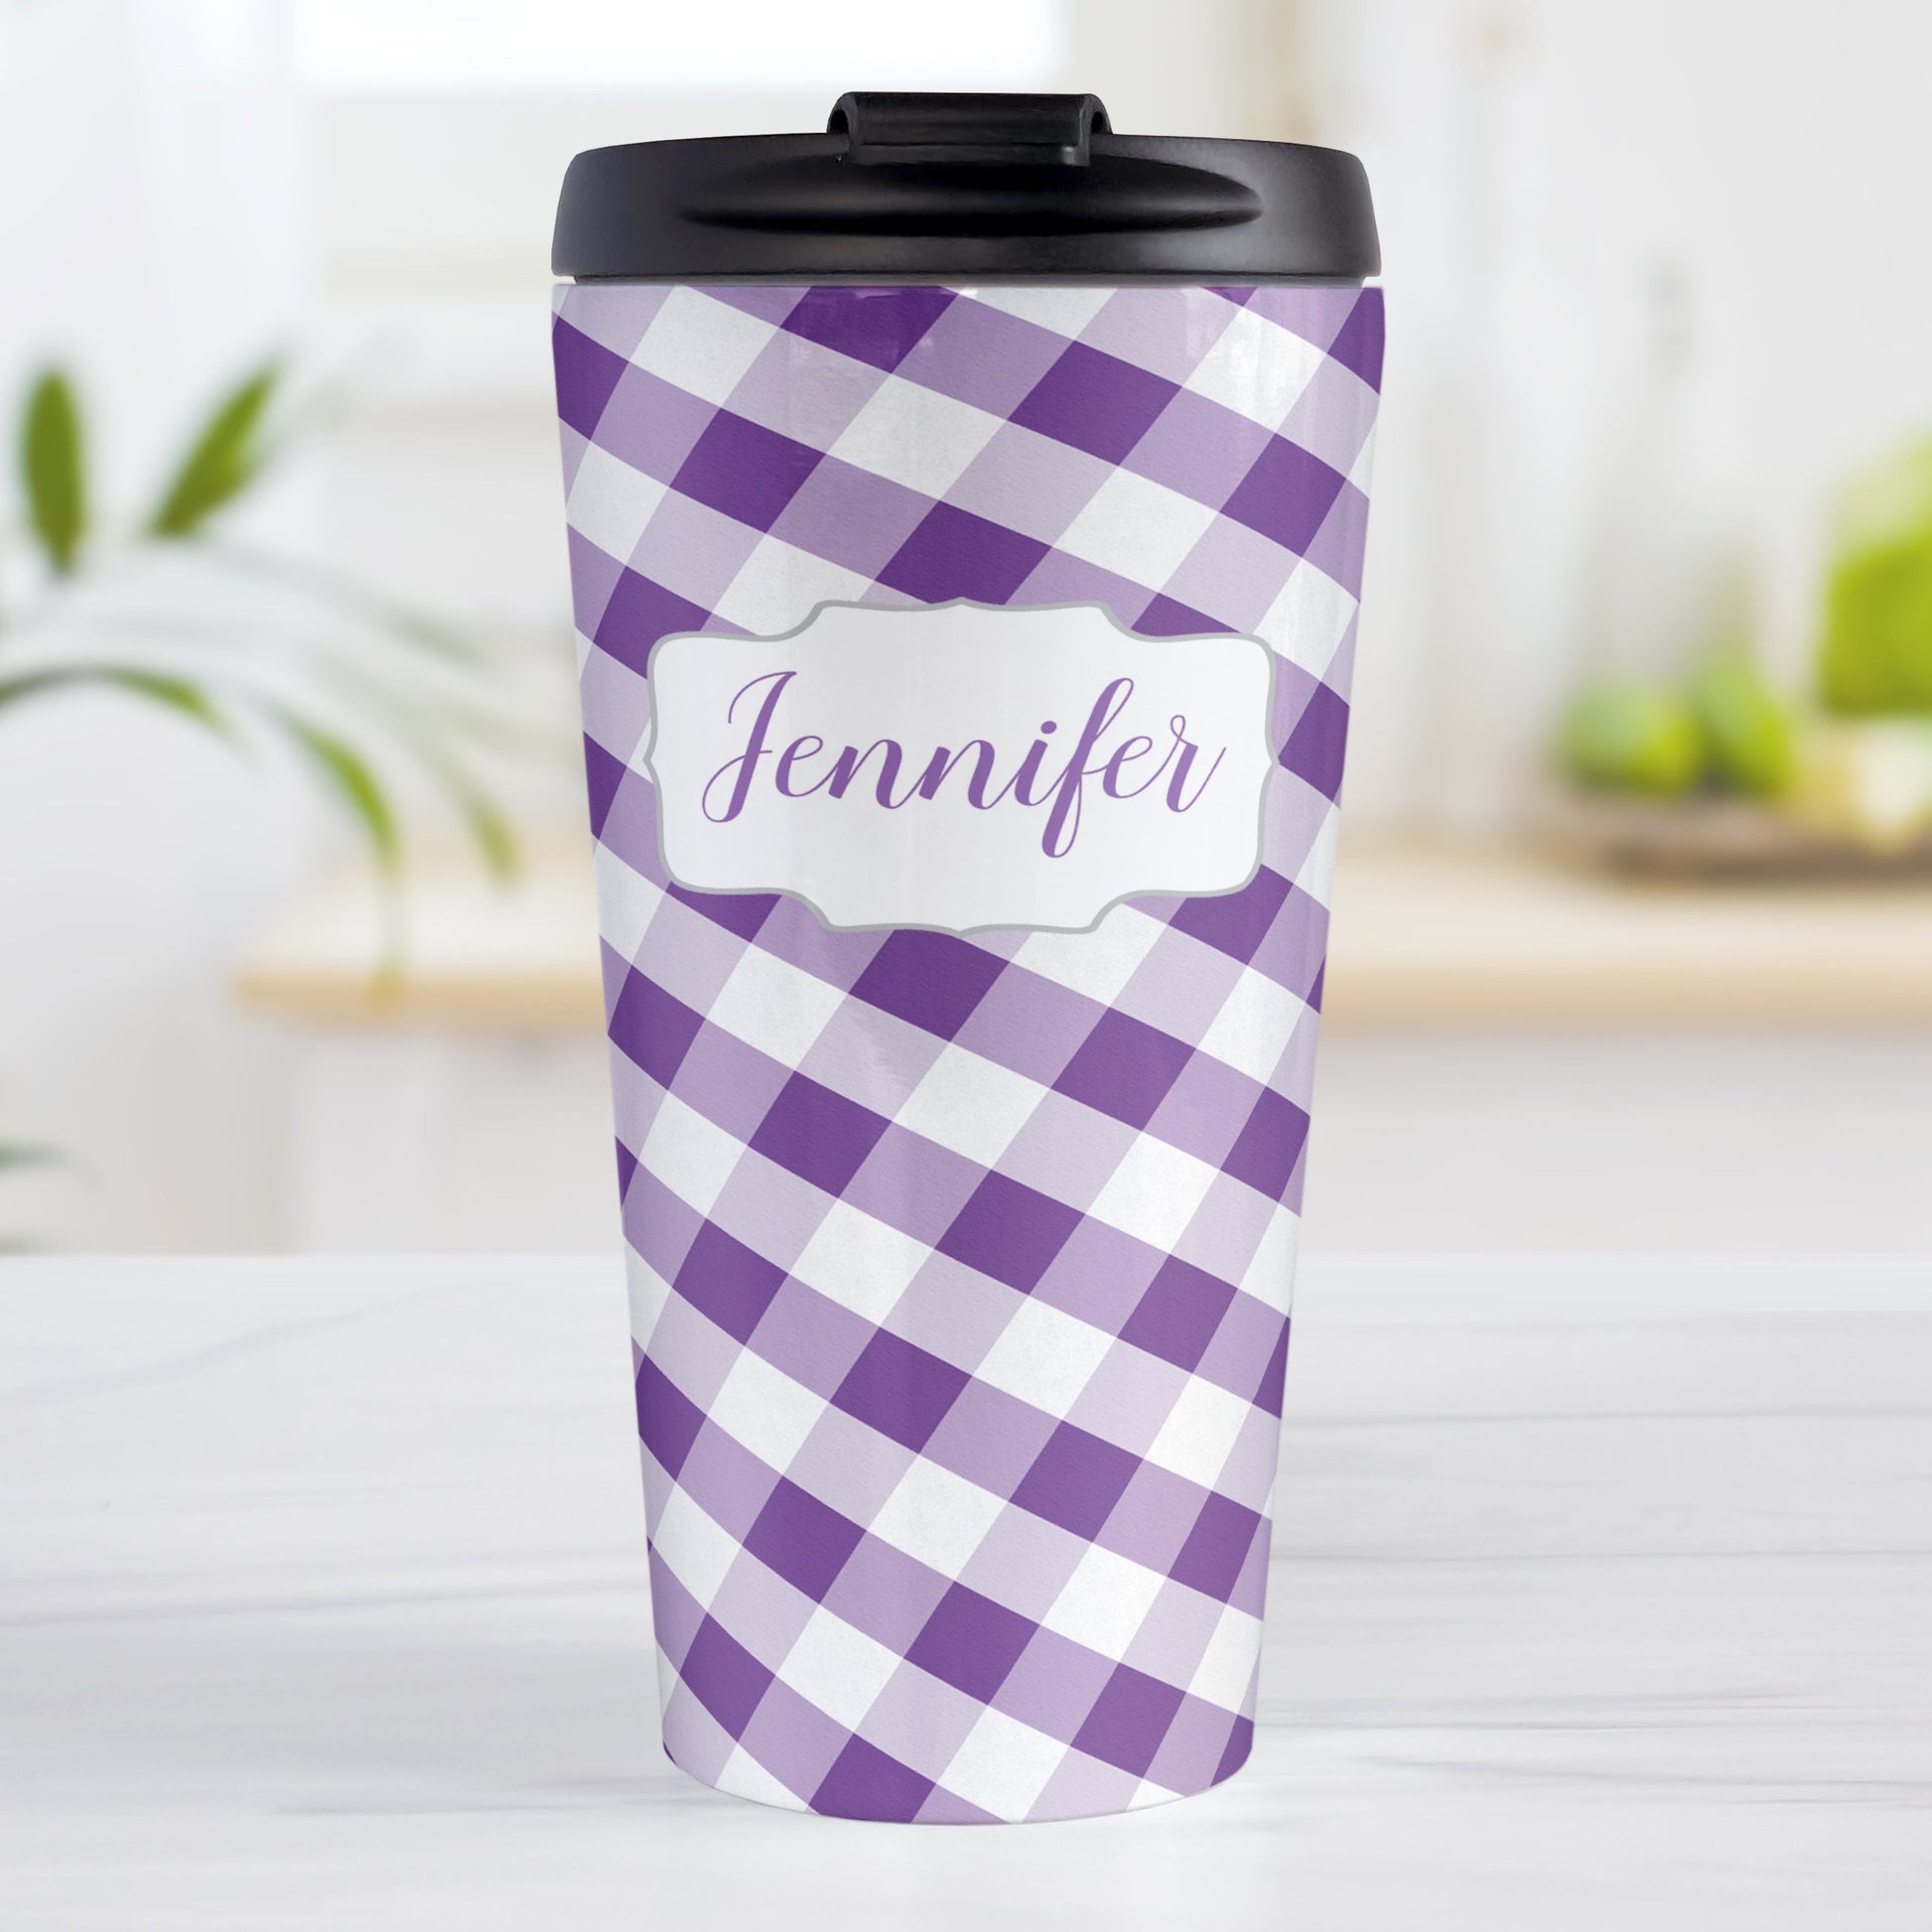 Personalized Purple Gingham Travel Mug (15oz, stainless steel insulated) at Amy's Coffee Mugs